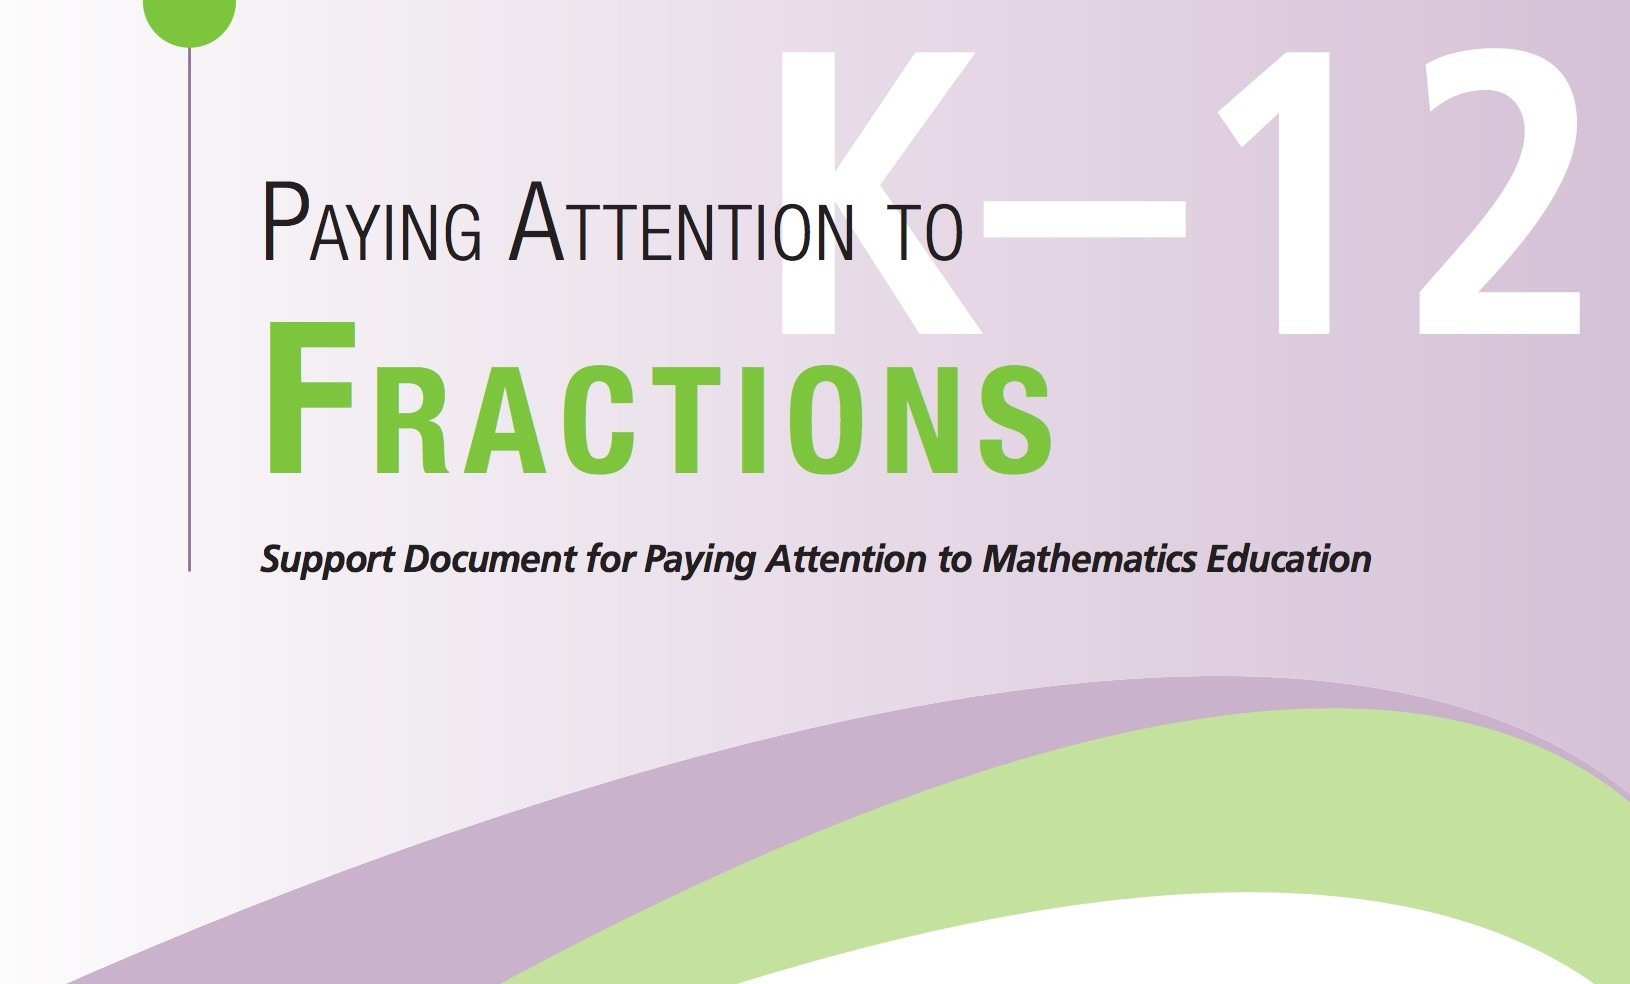 Paying Attention to Fractions